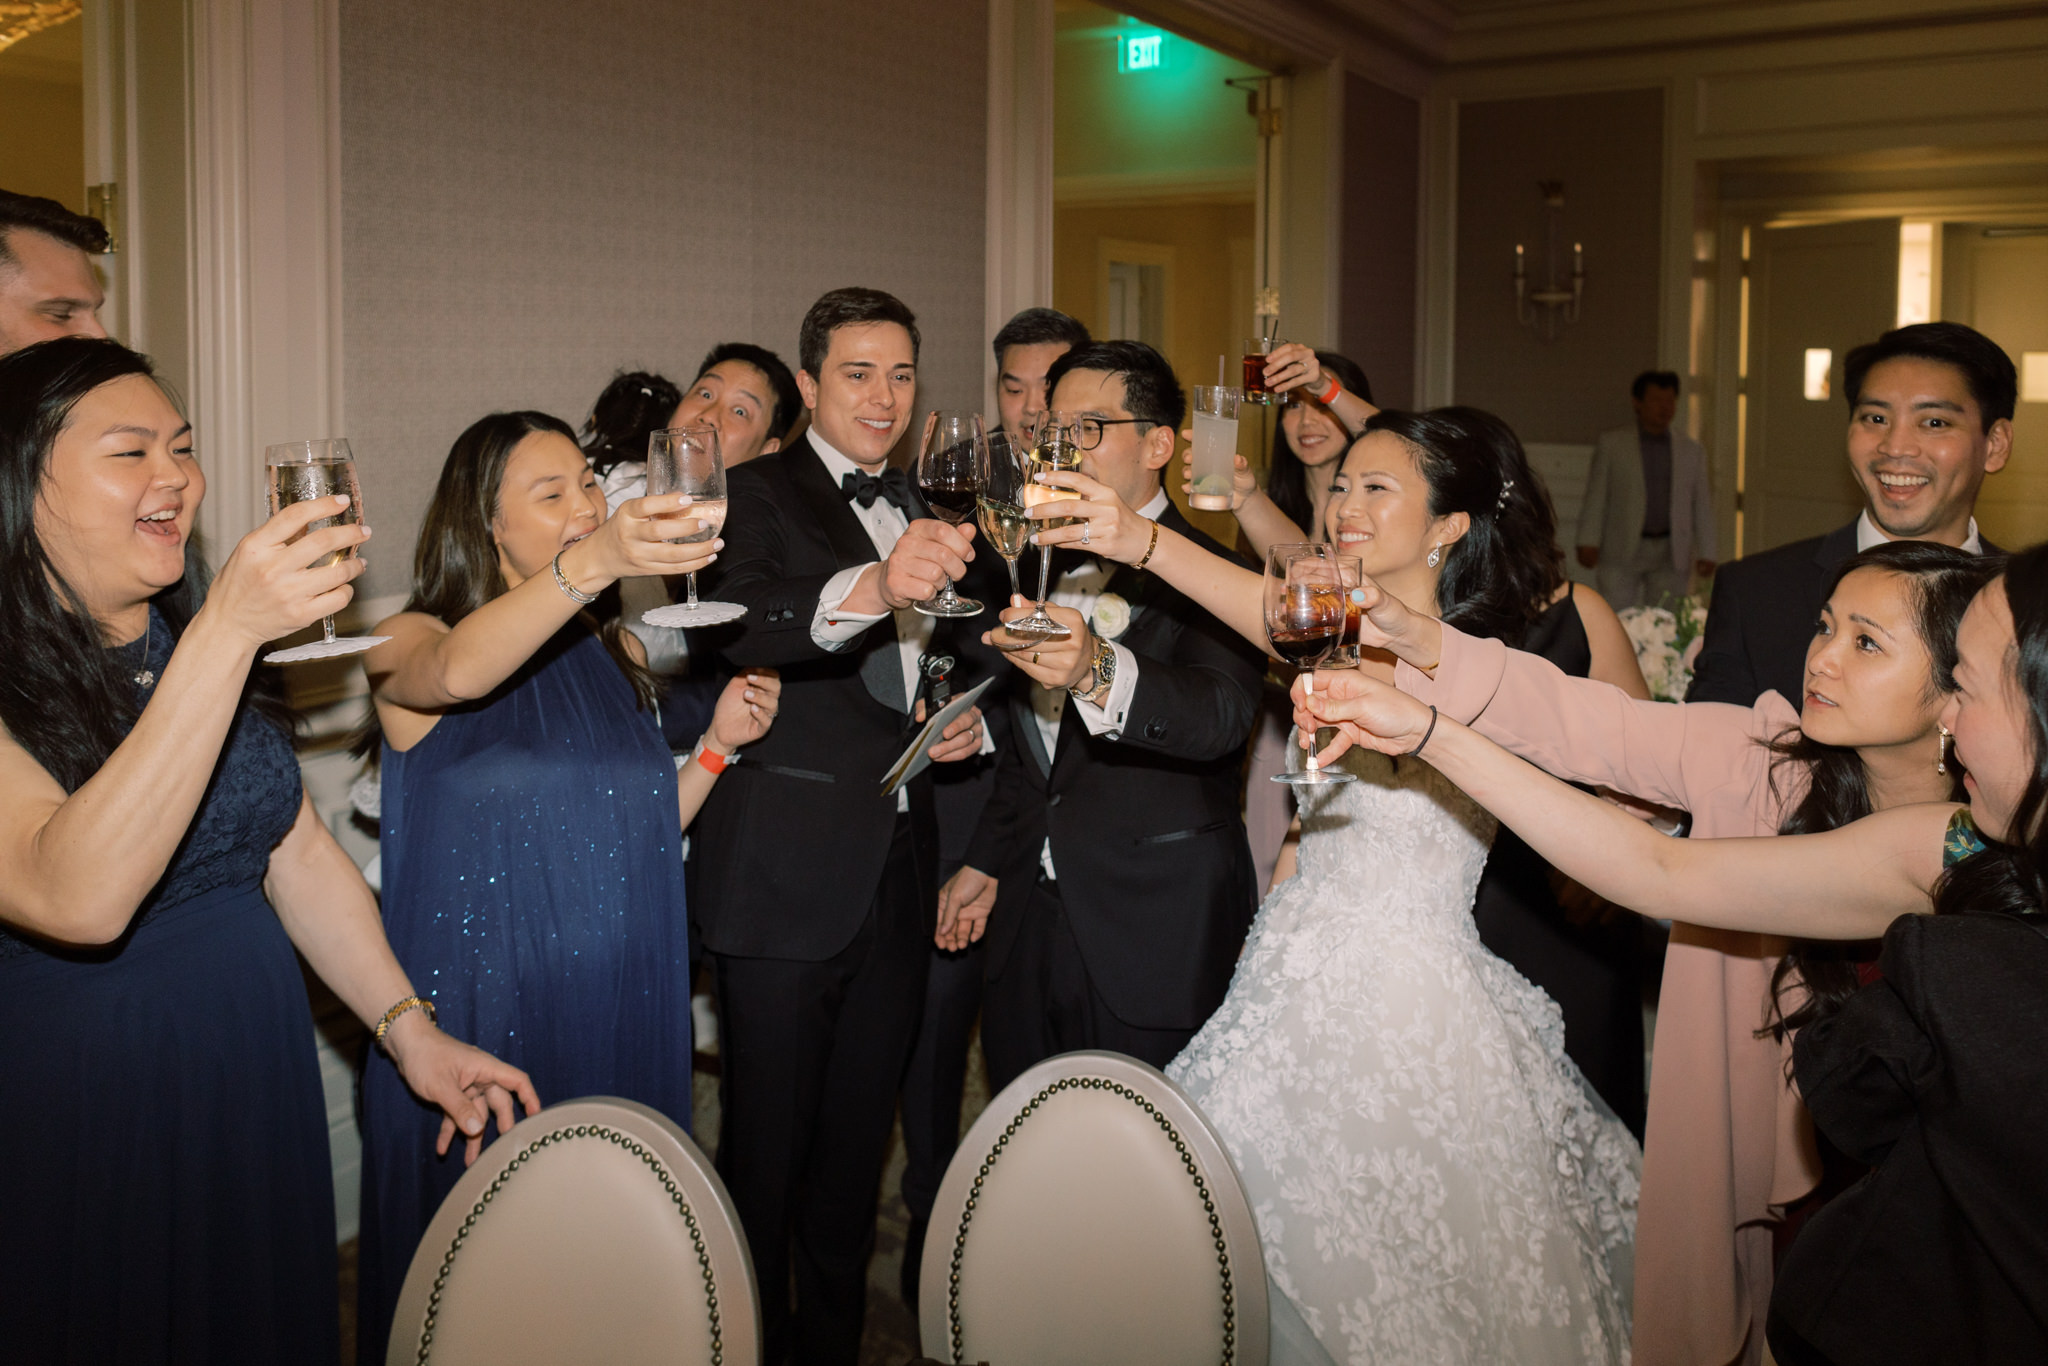 The bride, groom, and guests are lifting their wine glasses for a toast. NYC wedding image by Jenny Fu Studio